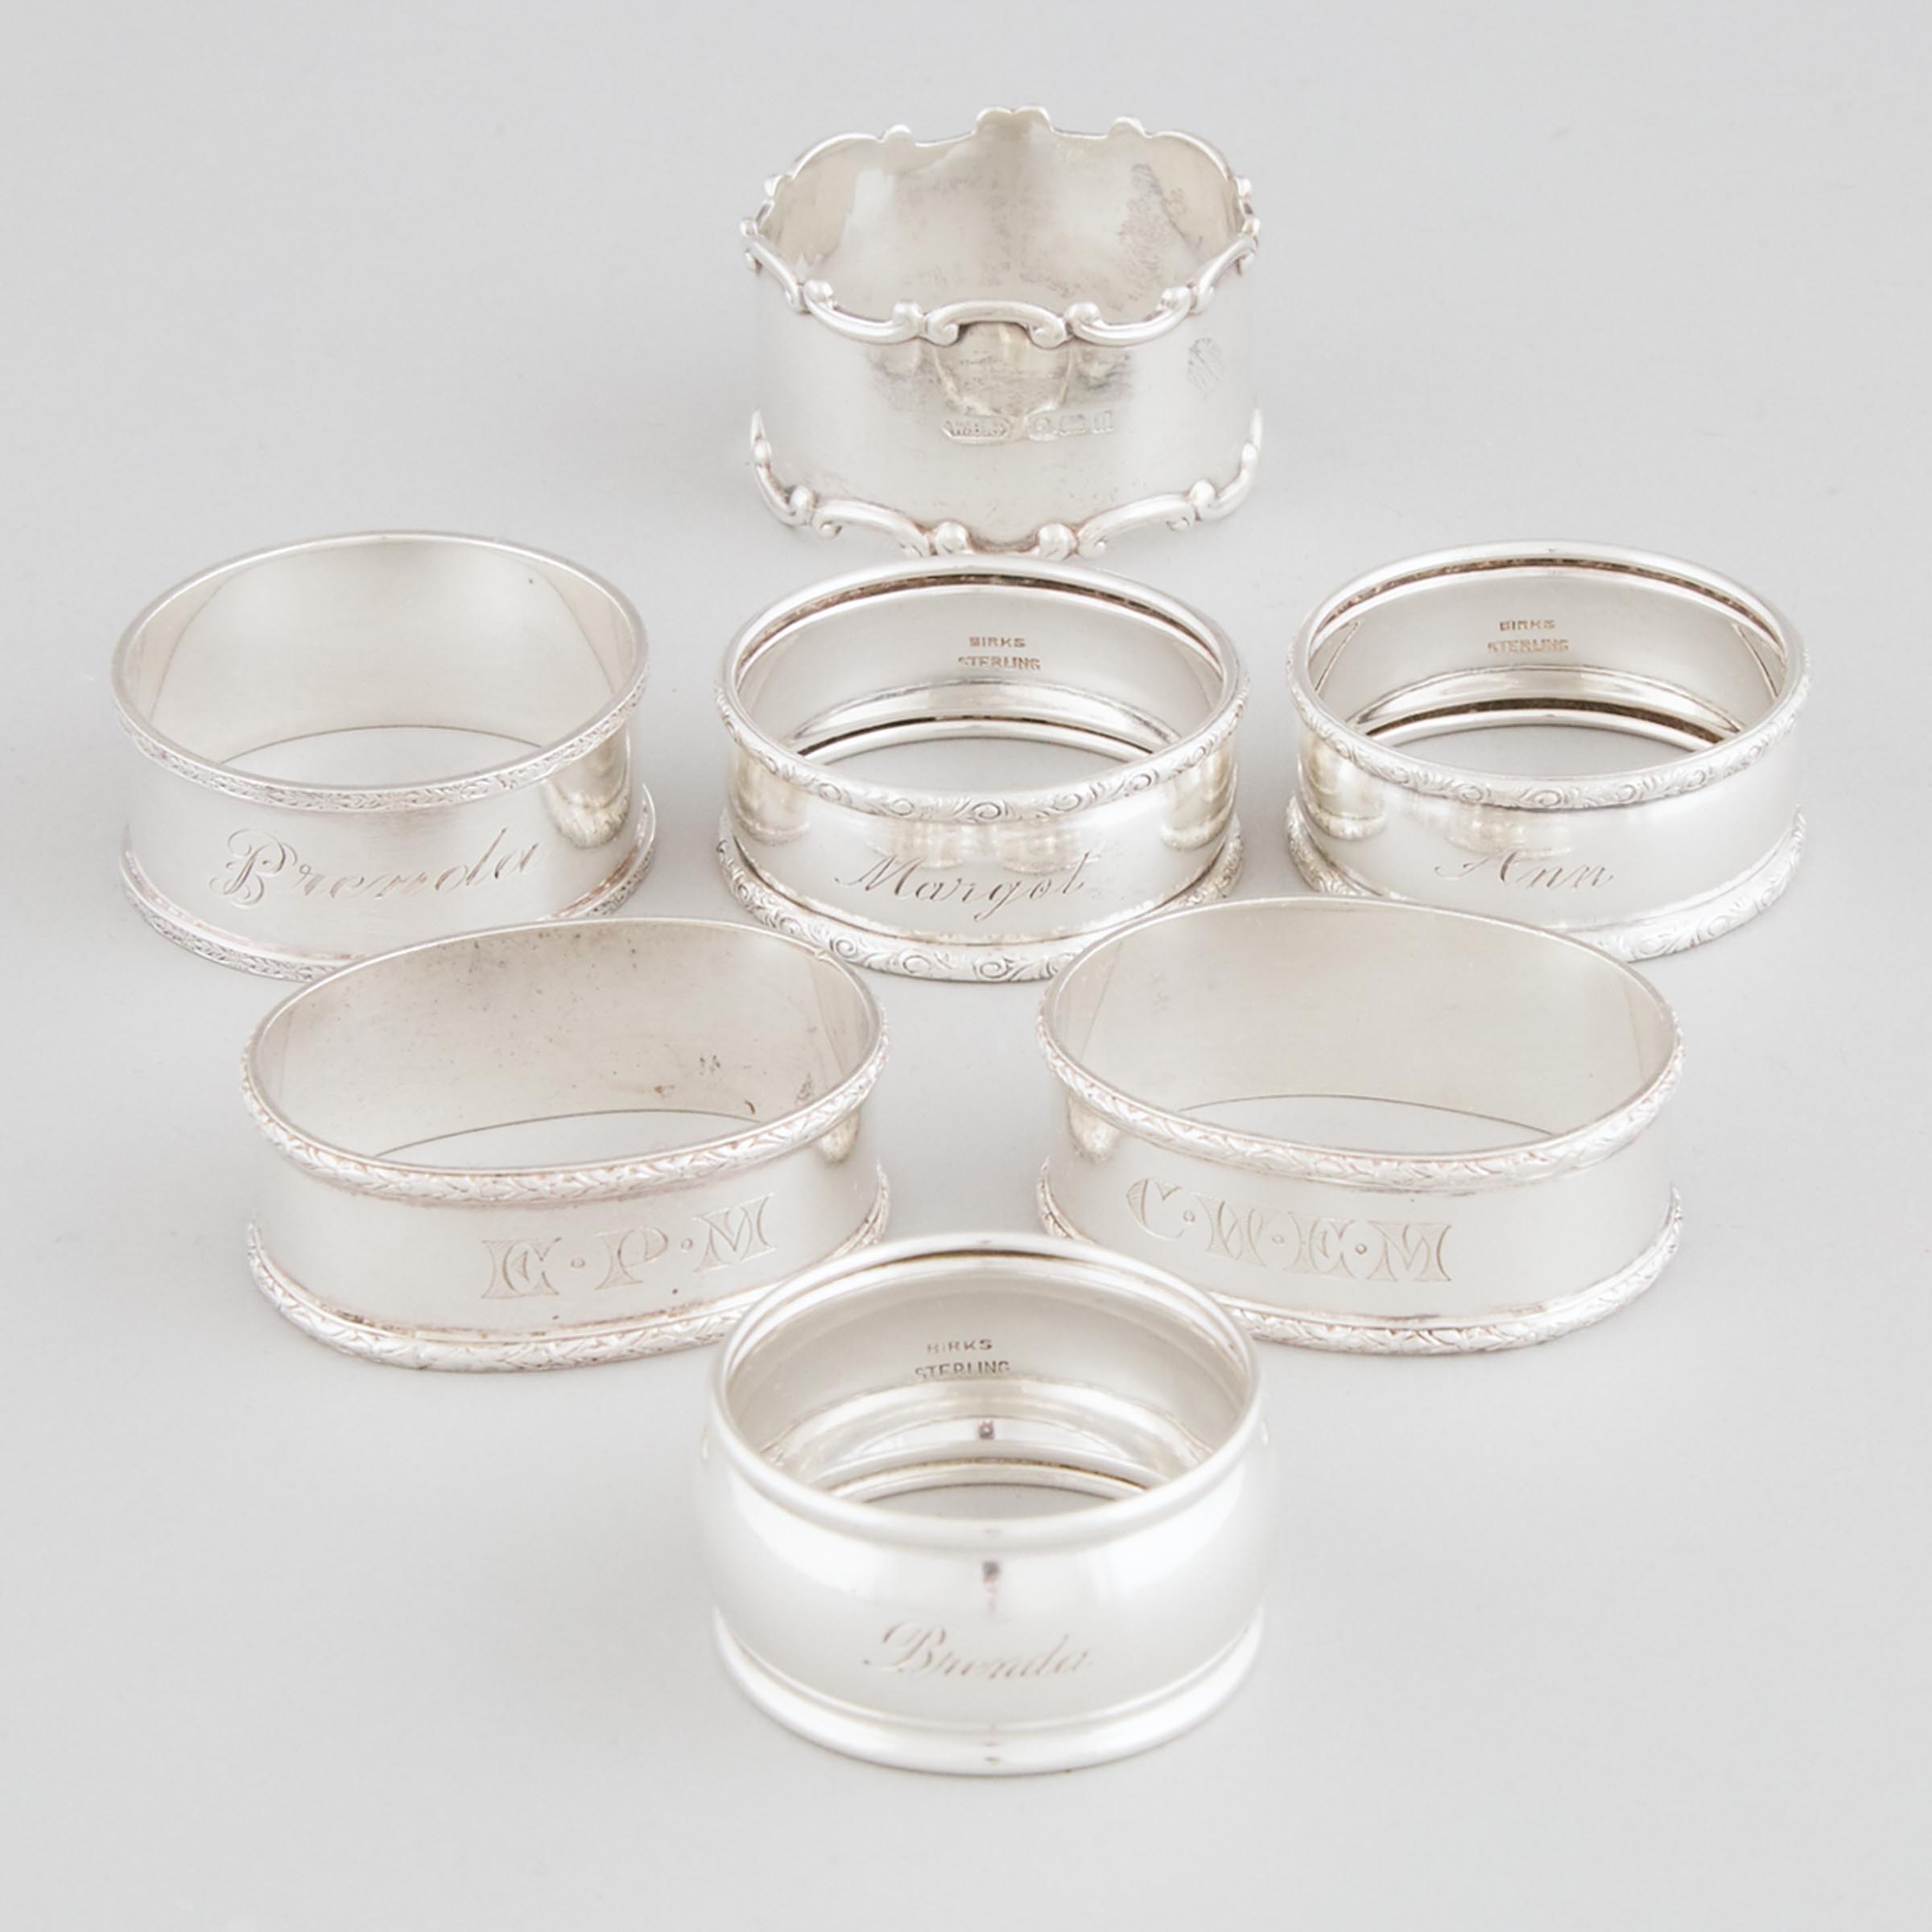 Seven Canadian and English Silver Napkin Rings, 20th century